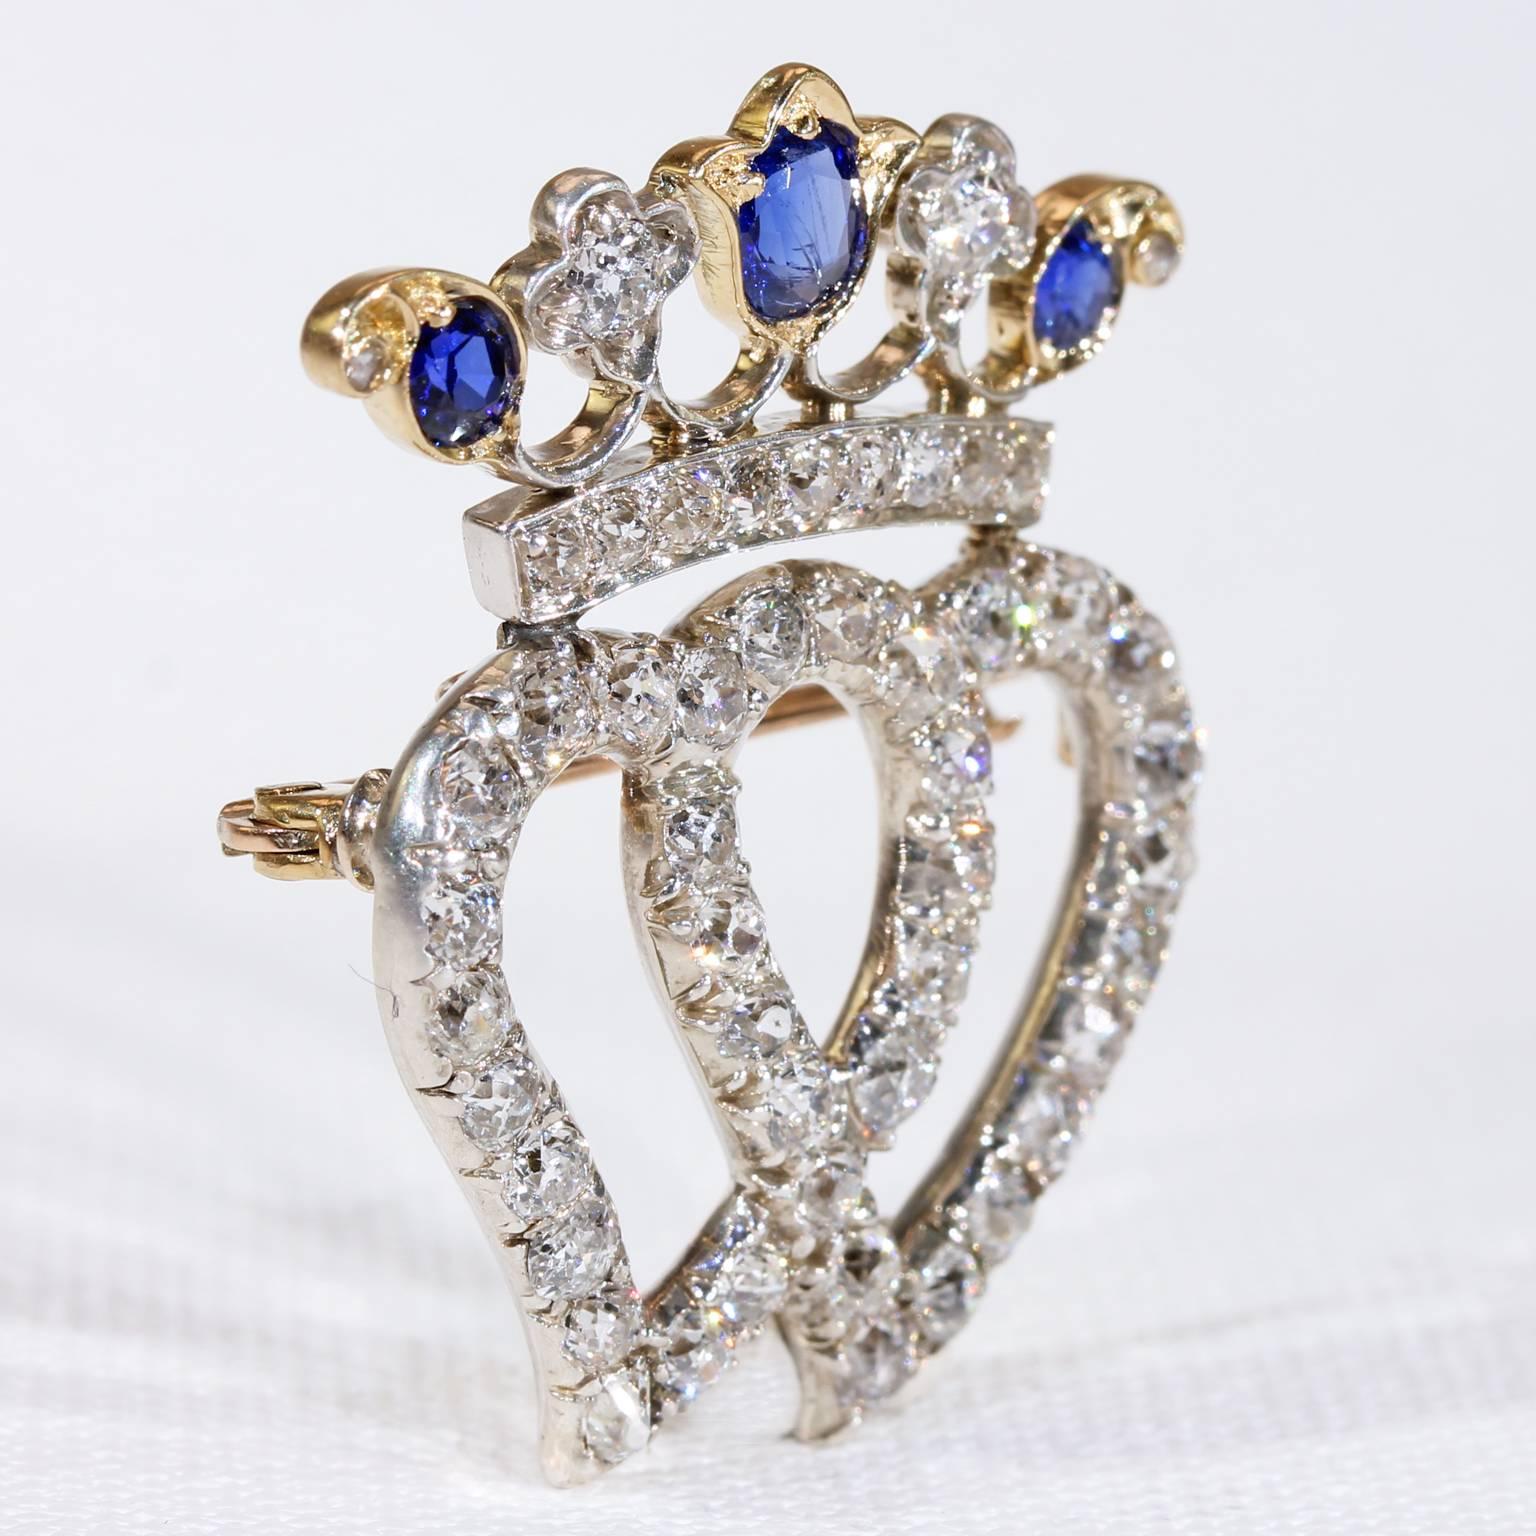 This antique Victorian sapphire and diamond heart brooch-pendant was handcrafted in England, around 1860 by the famed company of Edward Tessier. It features a double heart motif, topped with a crown of diamonds and sapphires. The stones are set in